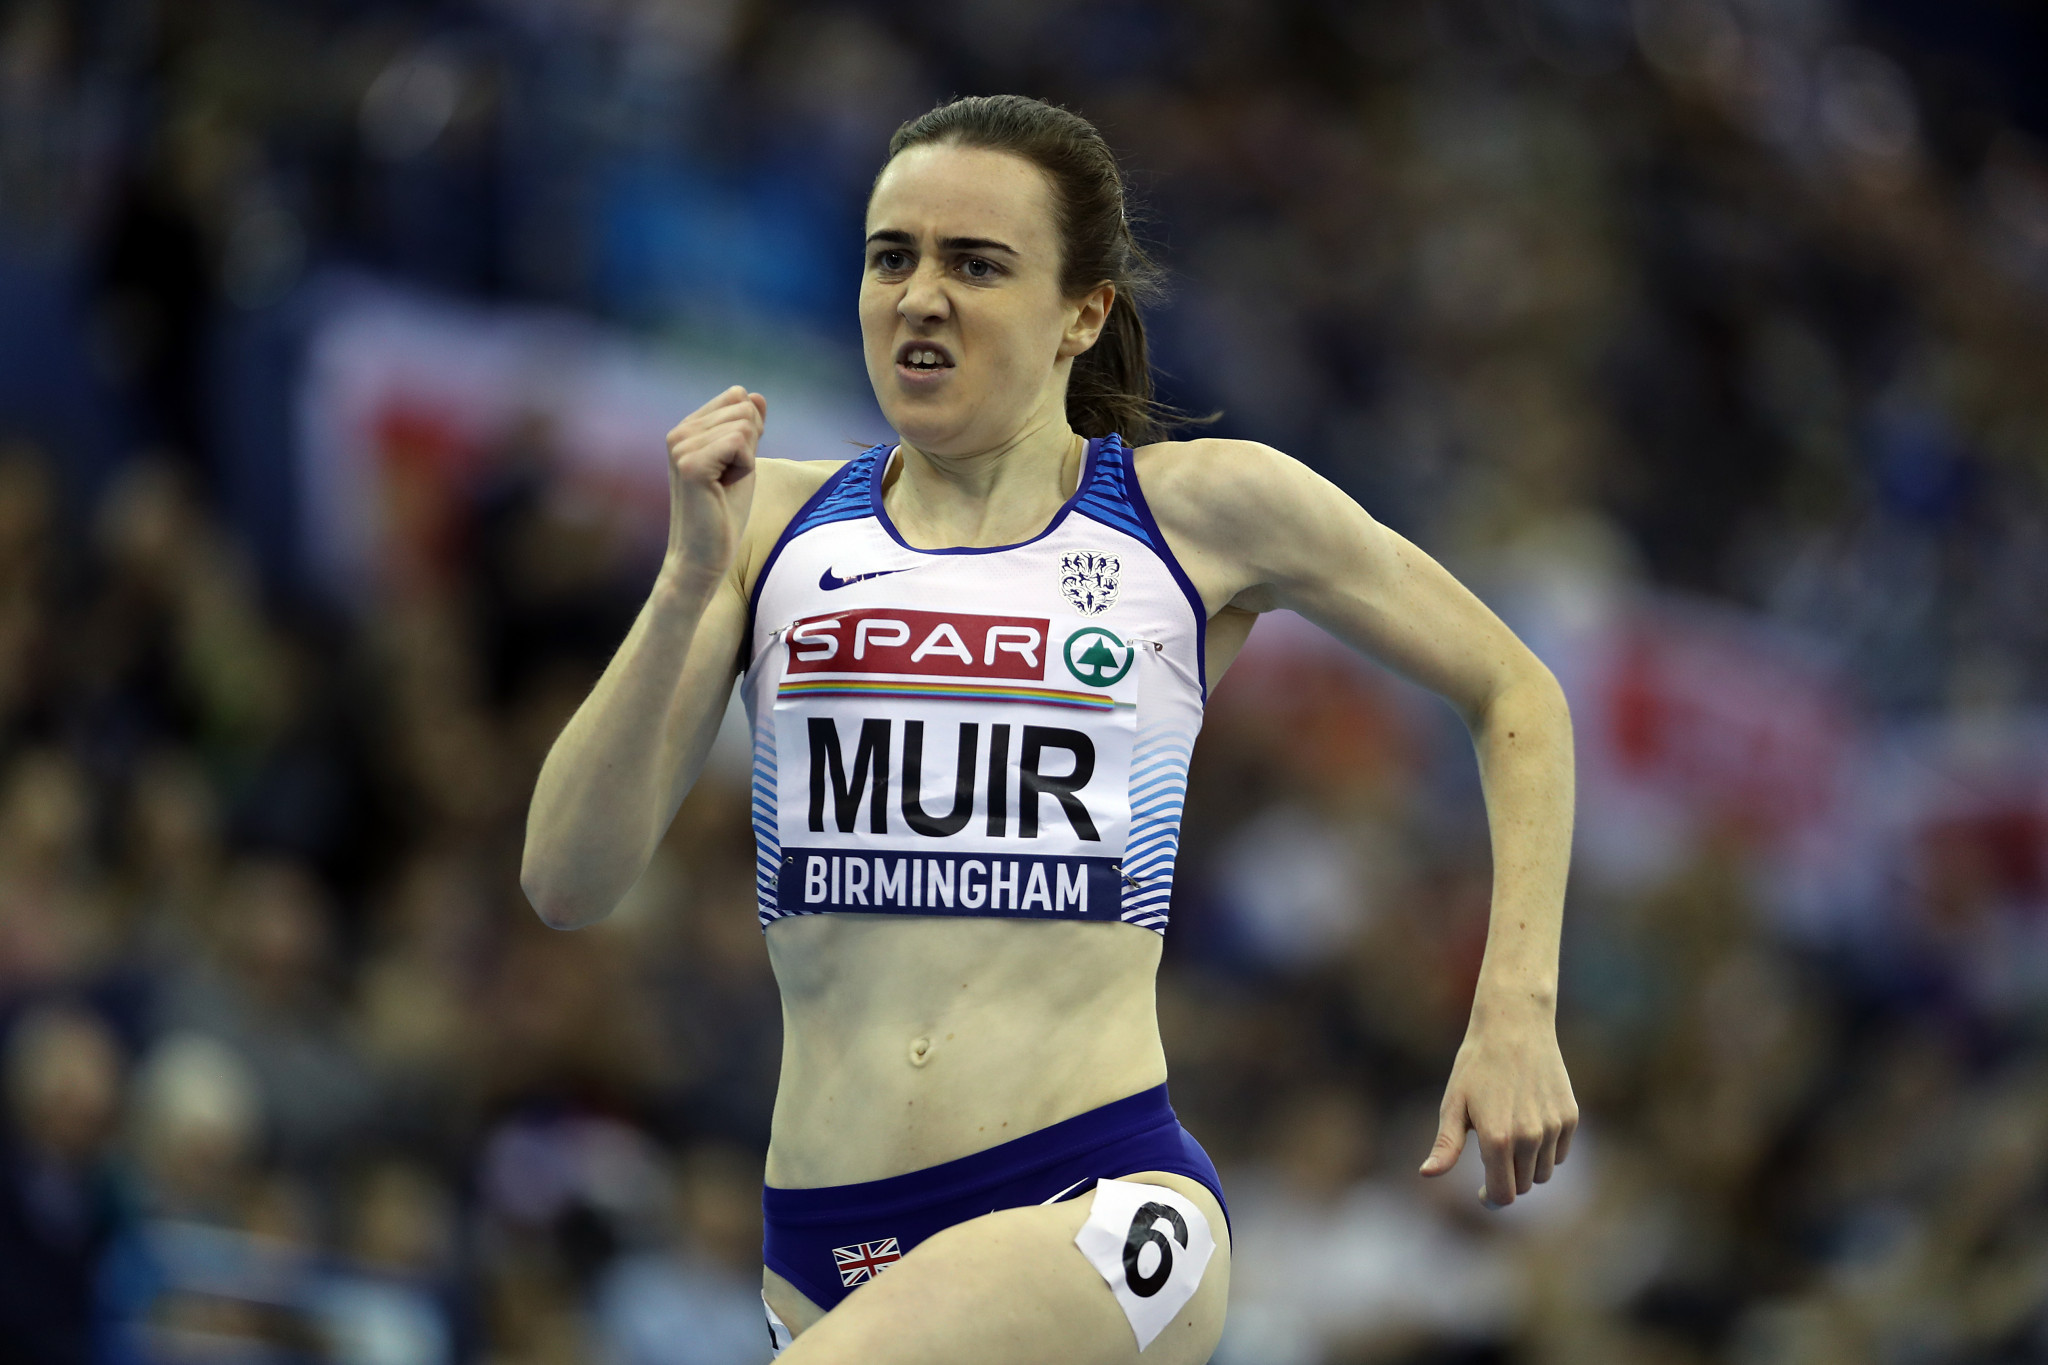 Laura Muir will be among the British hopes of success at the IAAF World Indoor Tour in Birmingham ©Getty Images